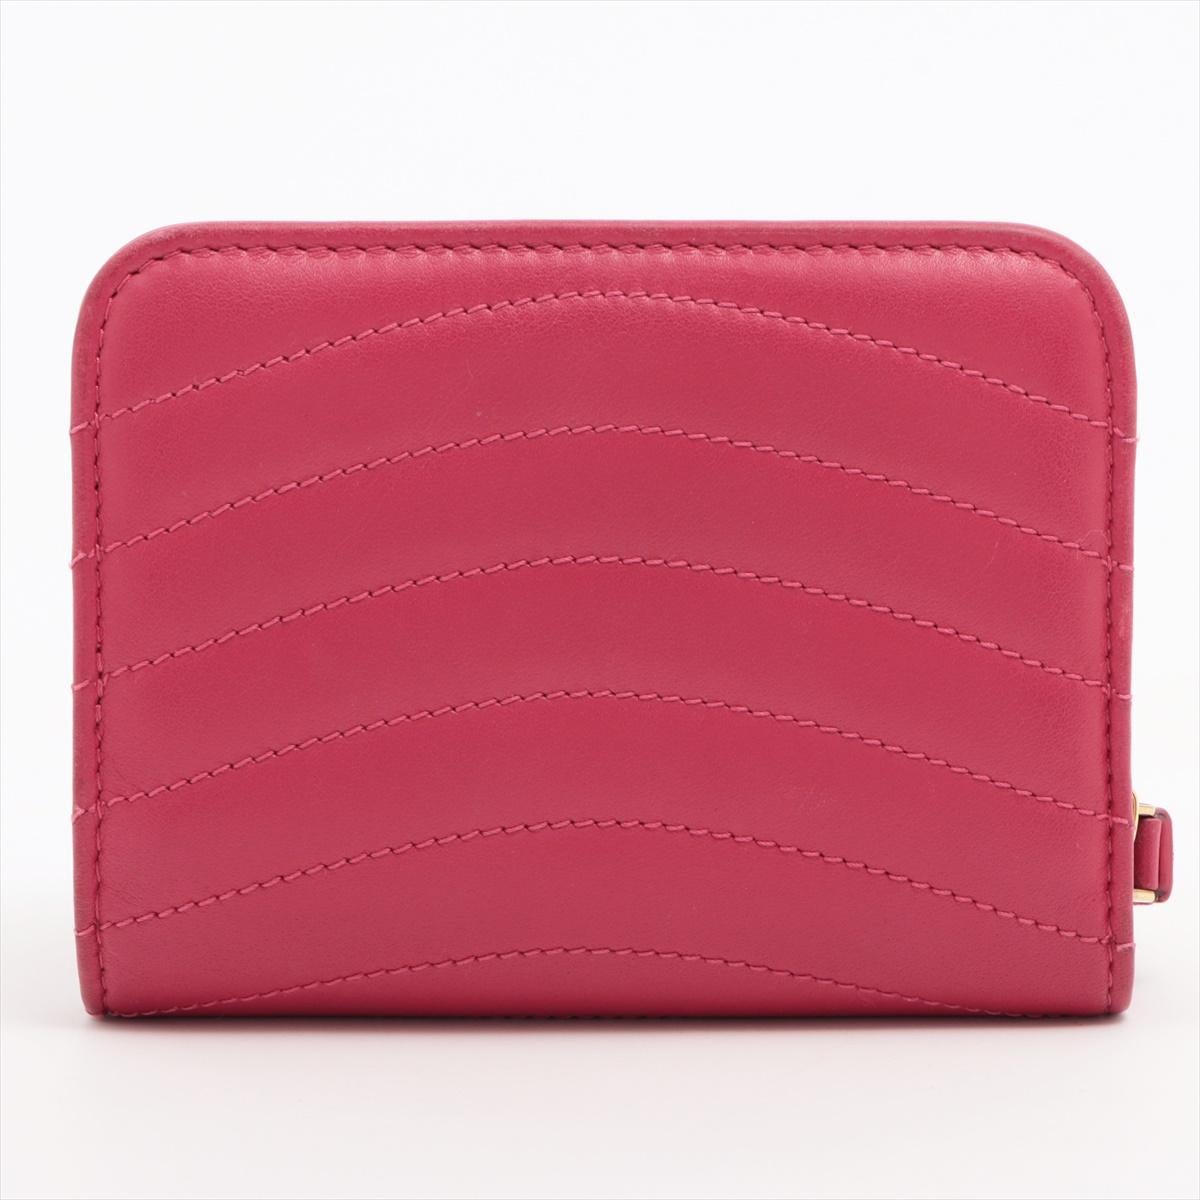 Louis Vuitton New Wave Zipped Compact Wallet Fuchsia In Good Condition For Sale In Indianapolis, IN